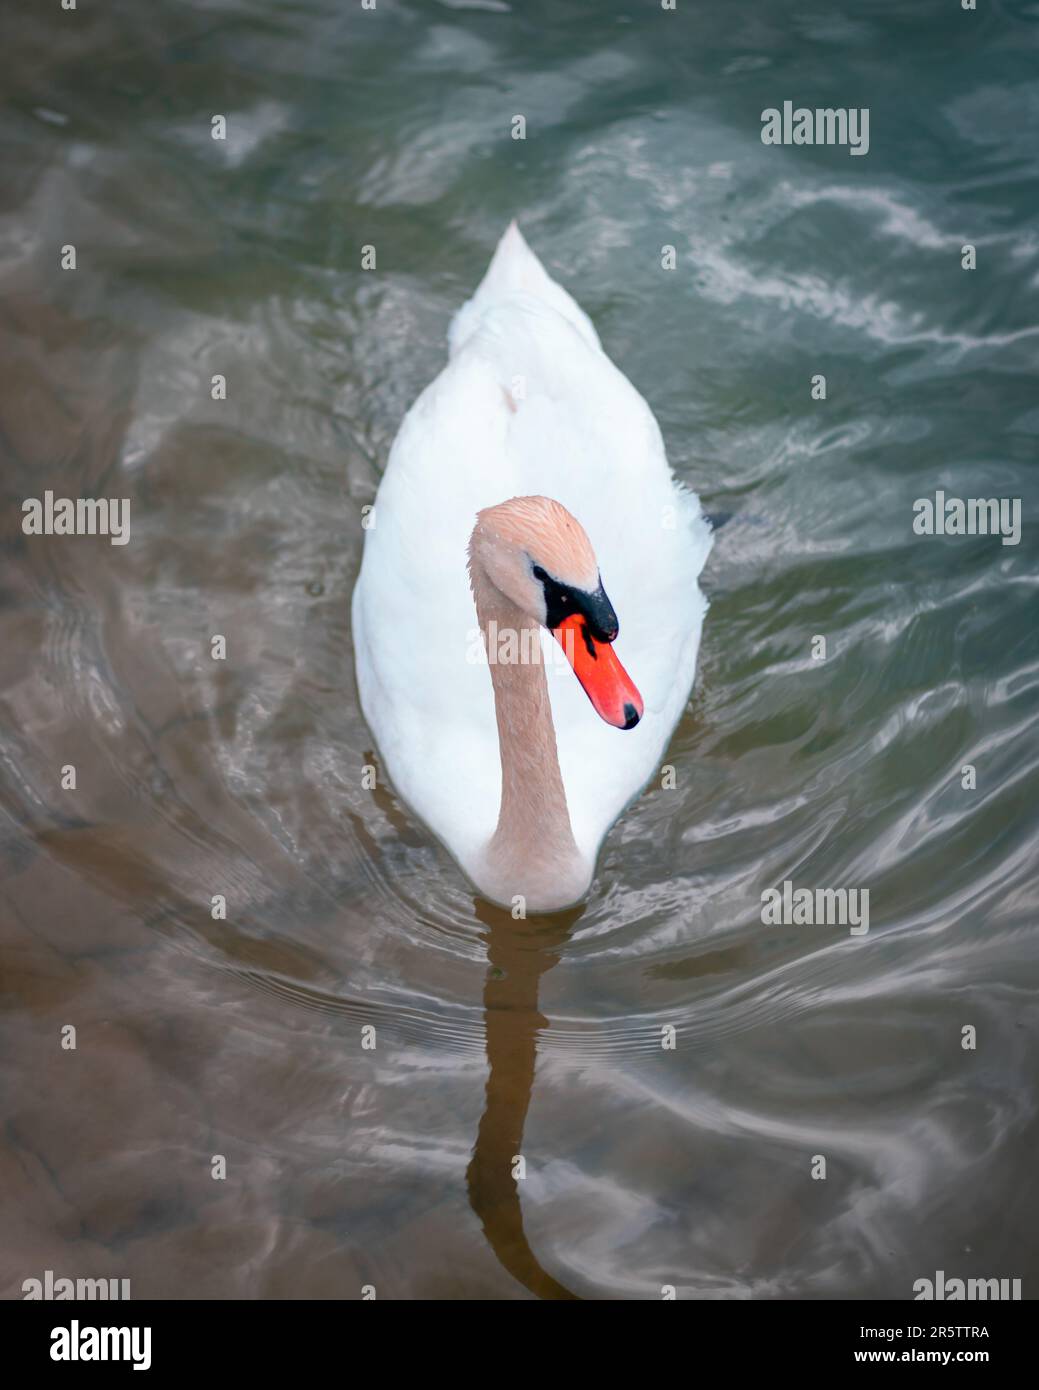 A majestic white swan gliding serenely across the tranquil waters of a lake, its neck gracefully arched as it surveys its surroundings Stock Photo